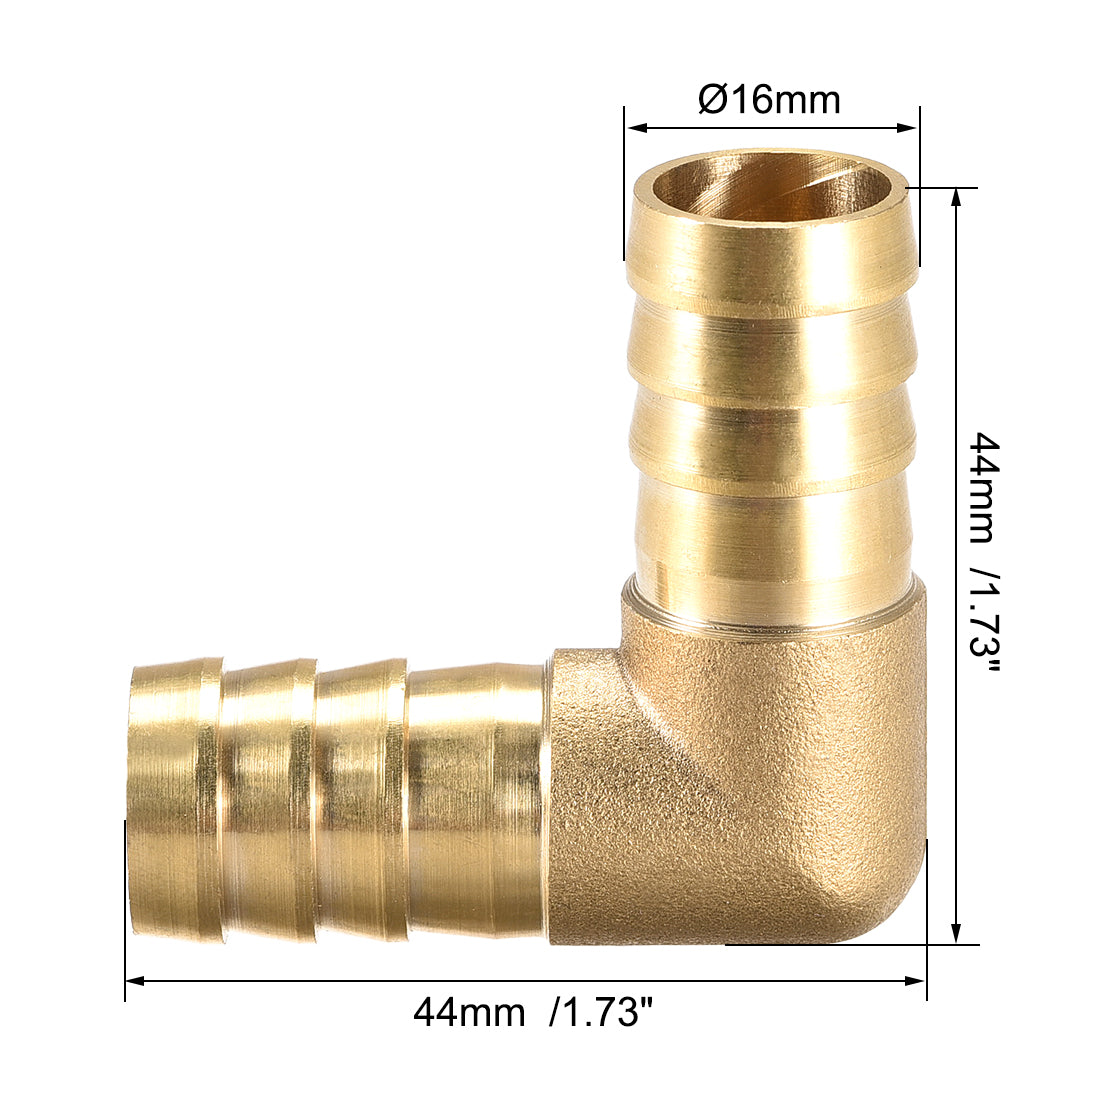 Uxcell Uxcell 12mm Barb Brass Hose Fitting 90 Degree Elbow Pipe Connector Coupler Tubing